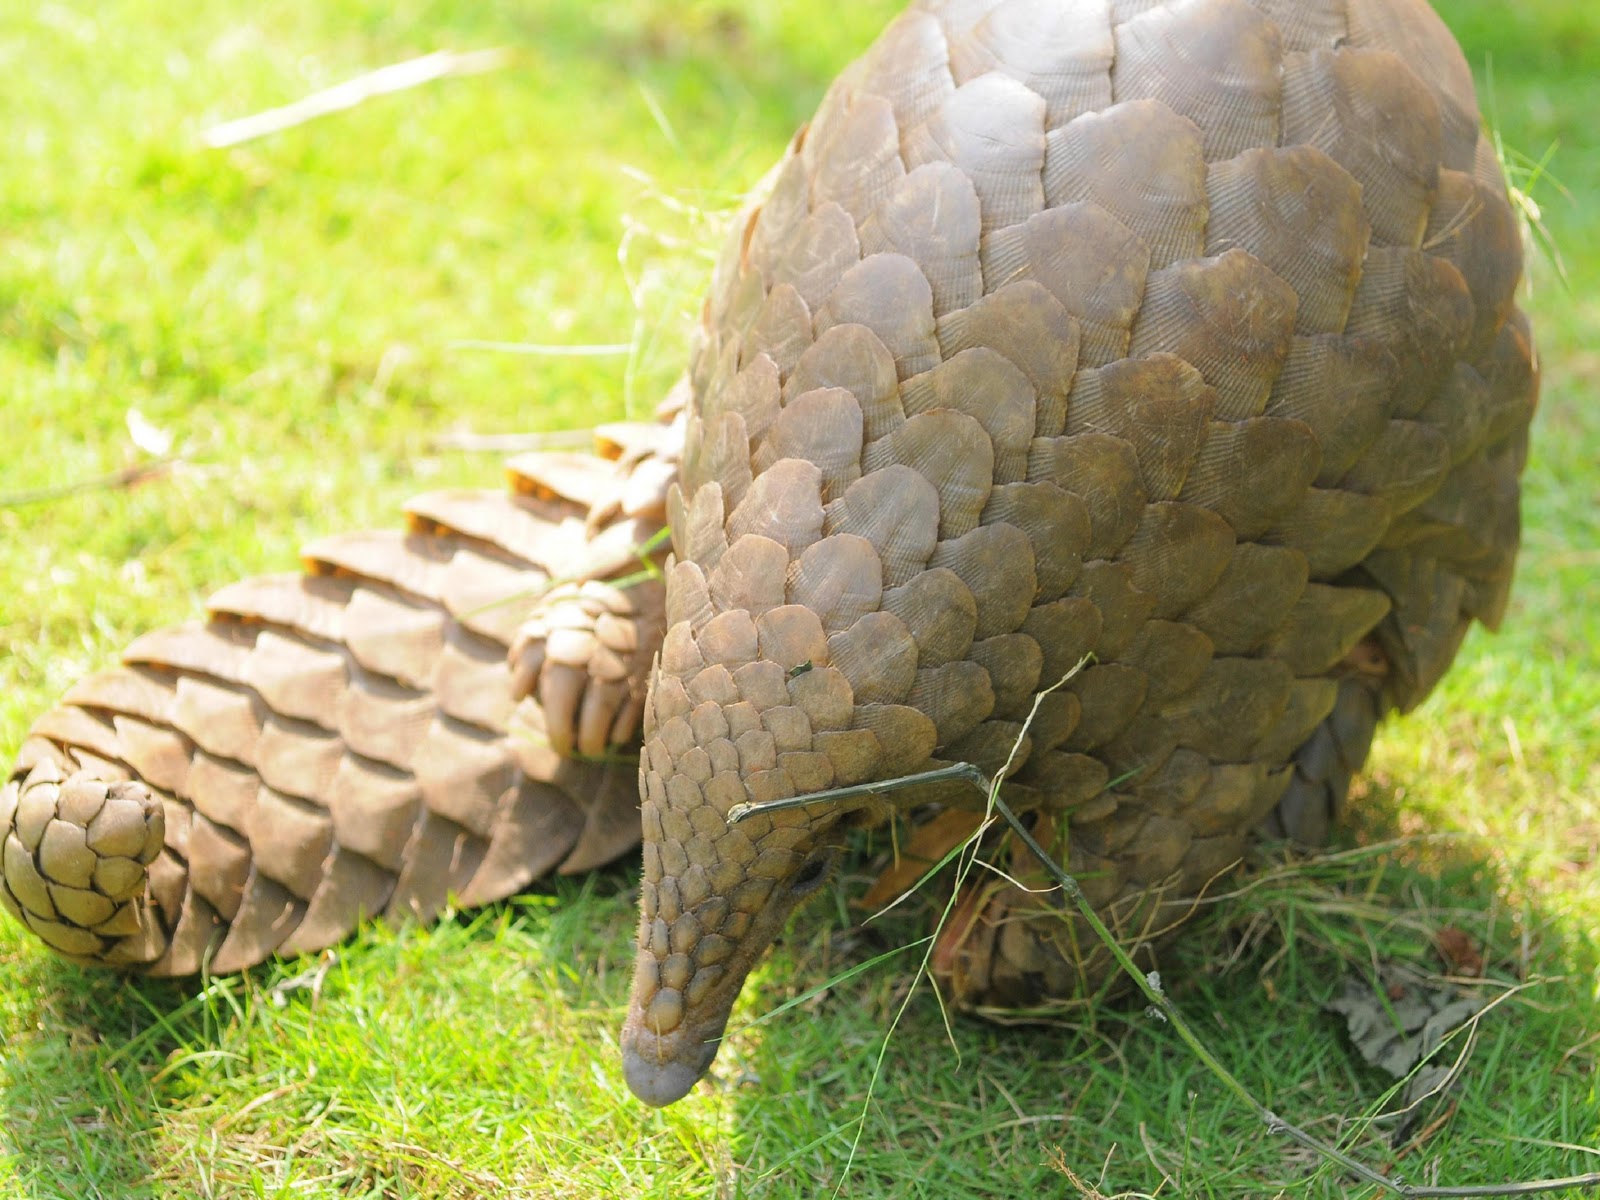 ENCYCLOPEDIA OF ANIMAL FACTS AND PICTURES: Pangolins